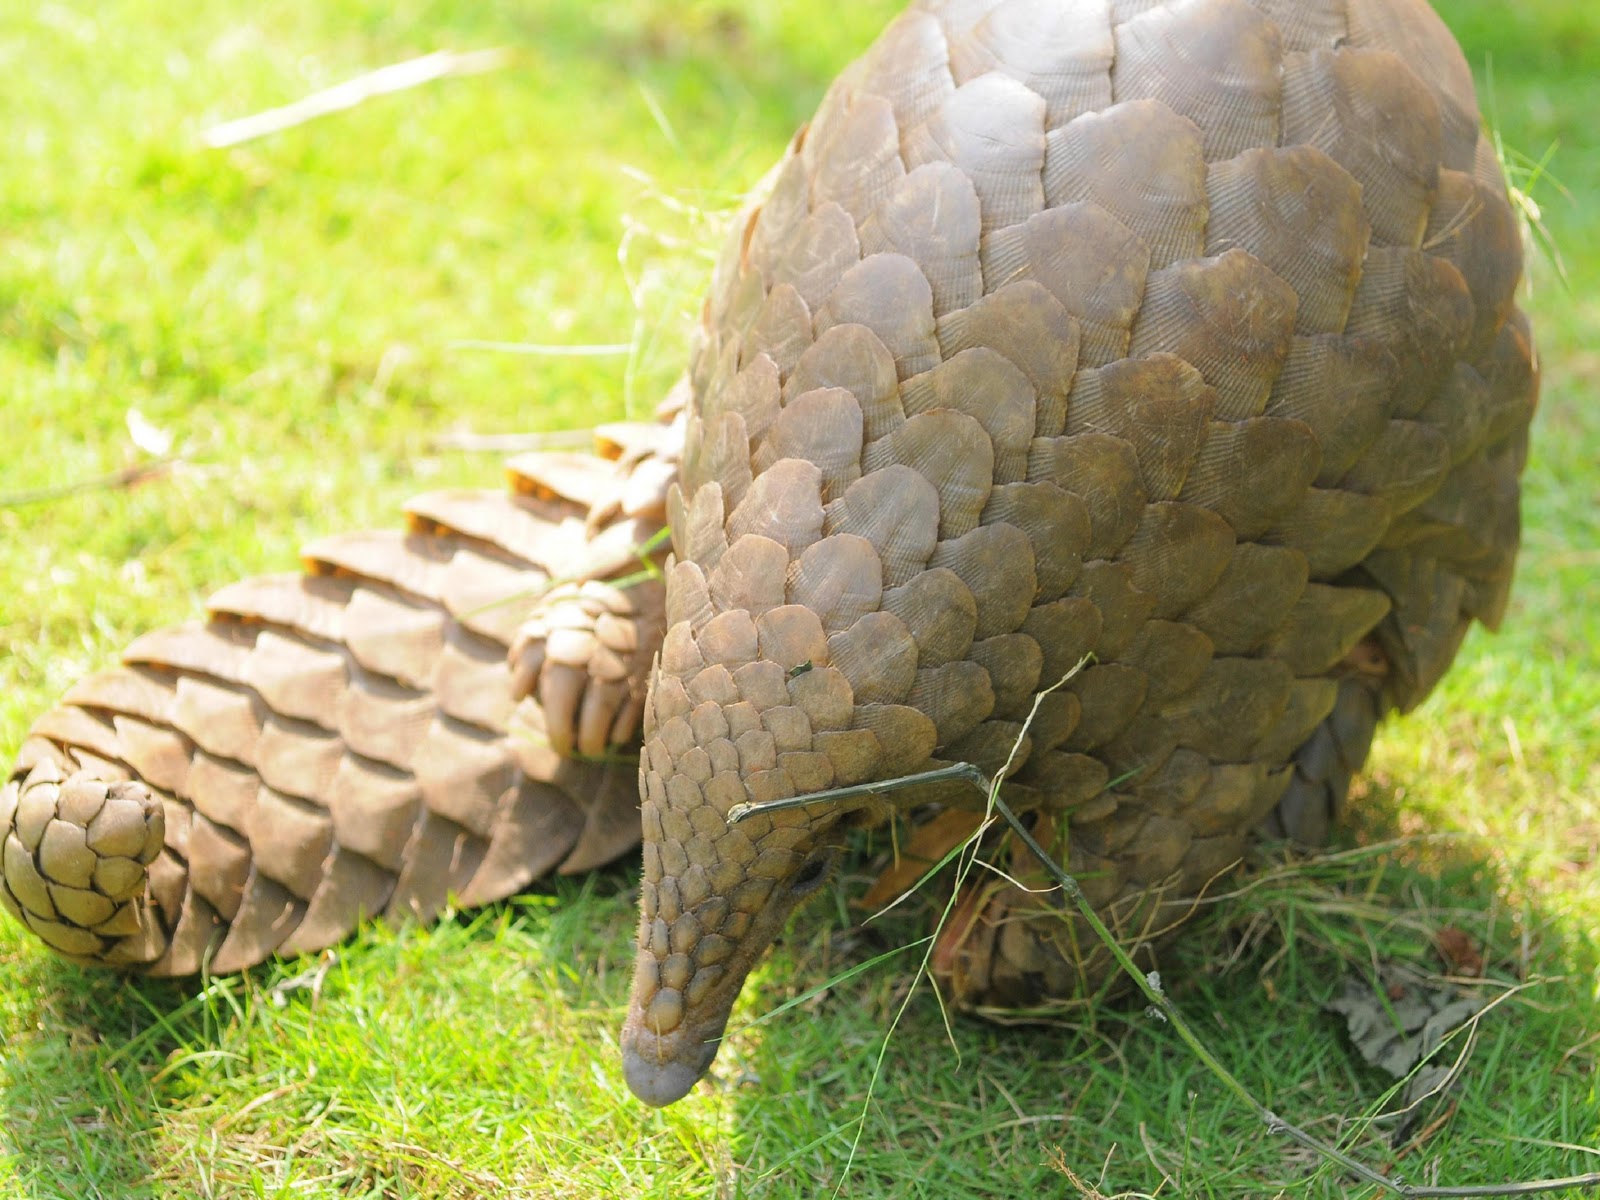 ENCYCLOPEDIA OF ANIMAL FACTS AND PICTURES: Pangolins